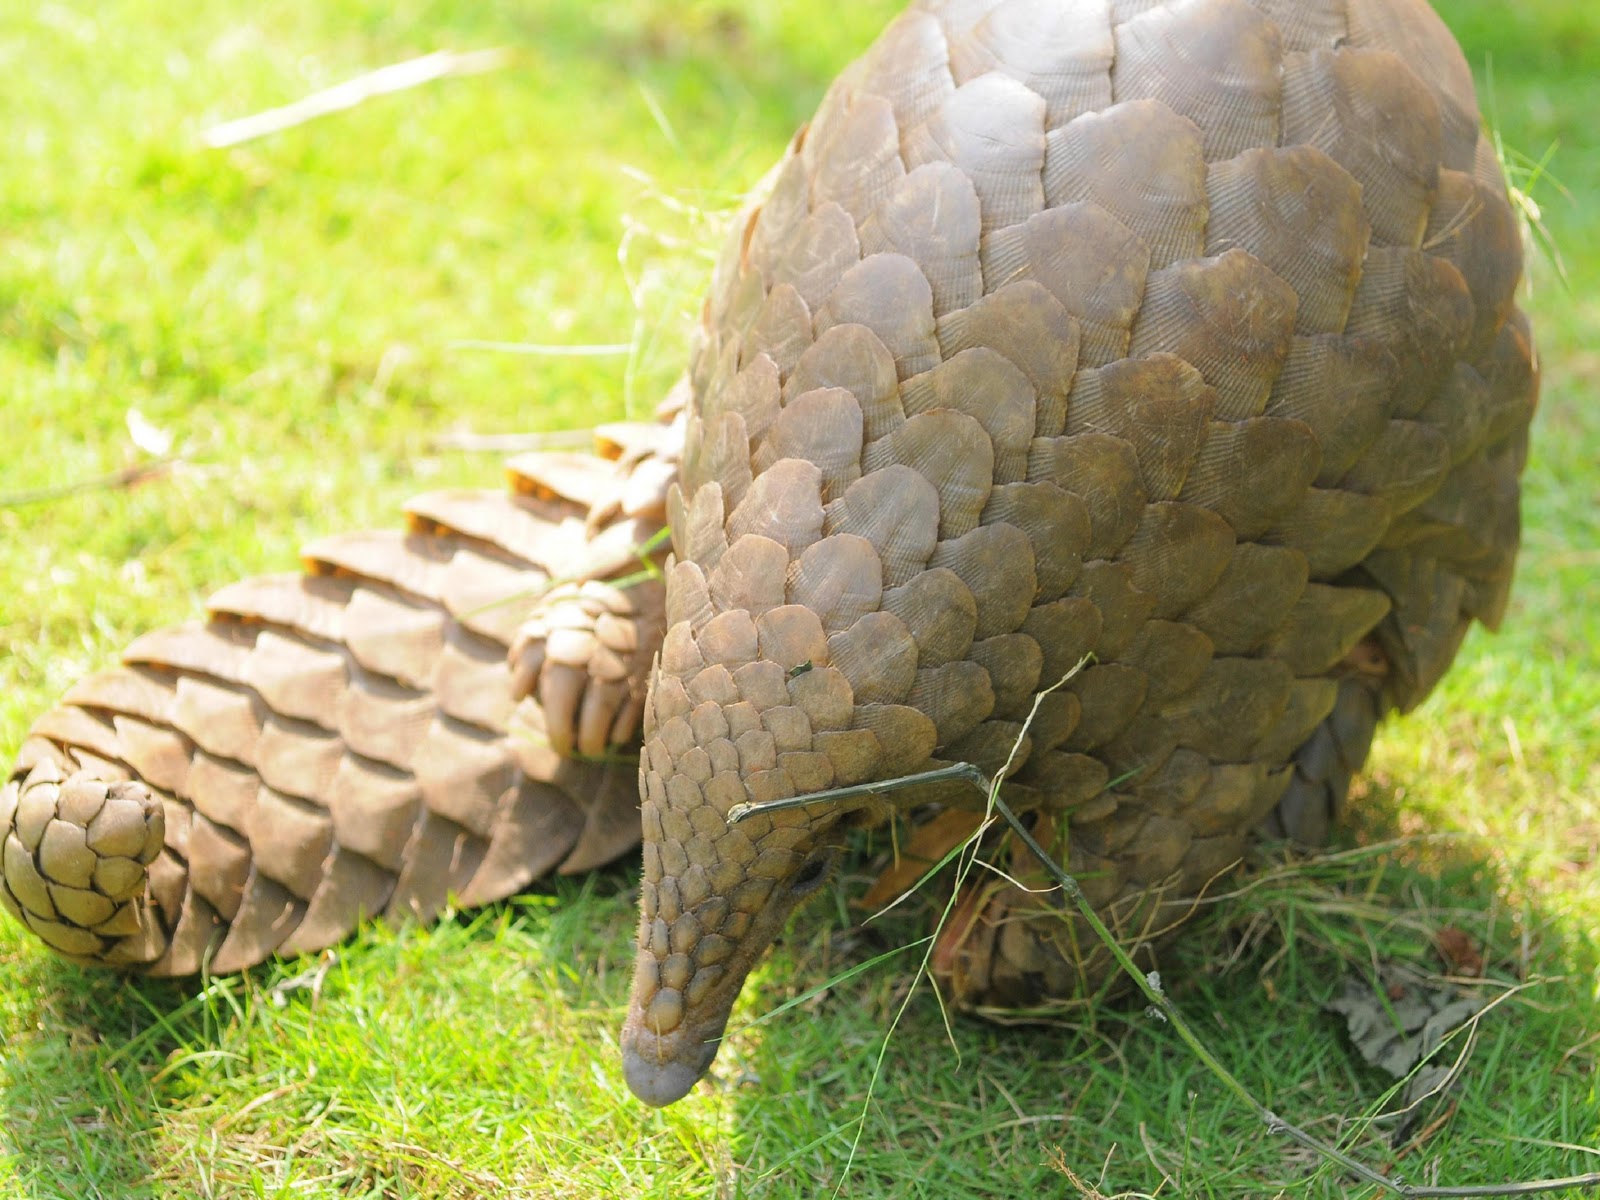 ENCYCLOPEDIA OF ANIMAL FACTS AND PICTURES: Pangolins